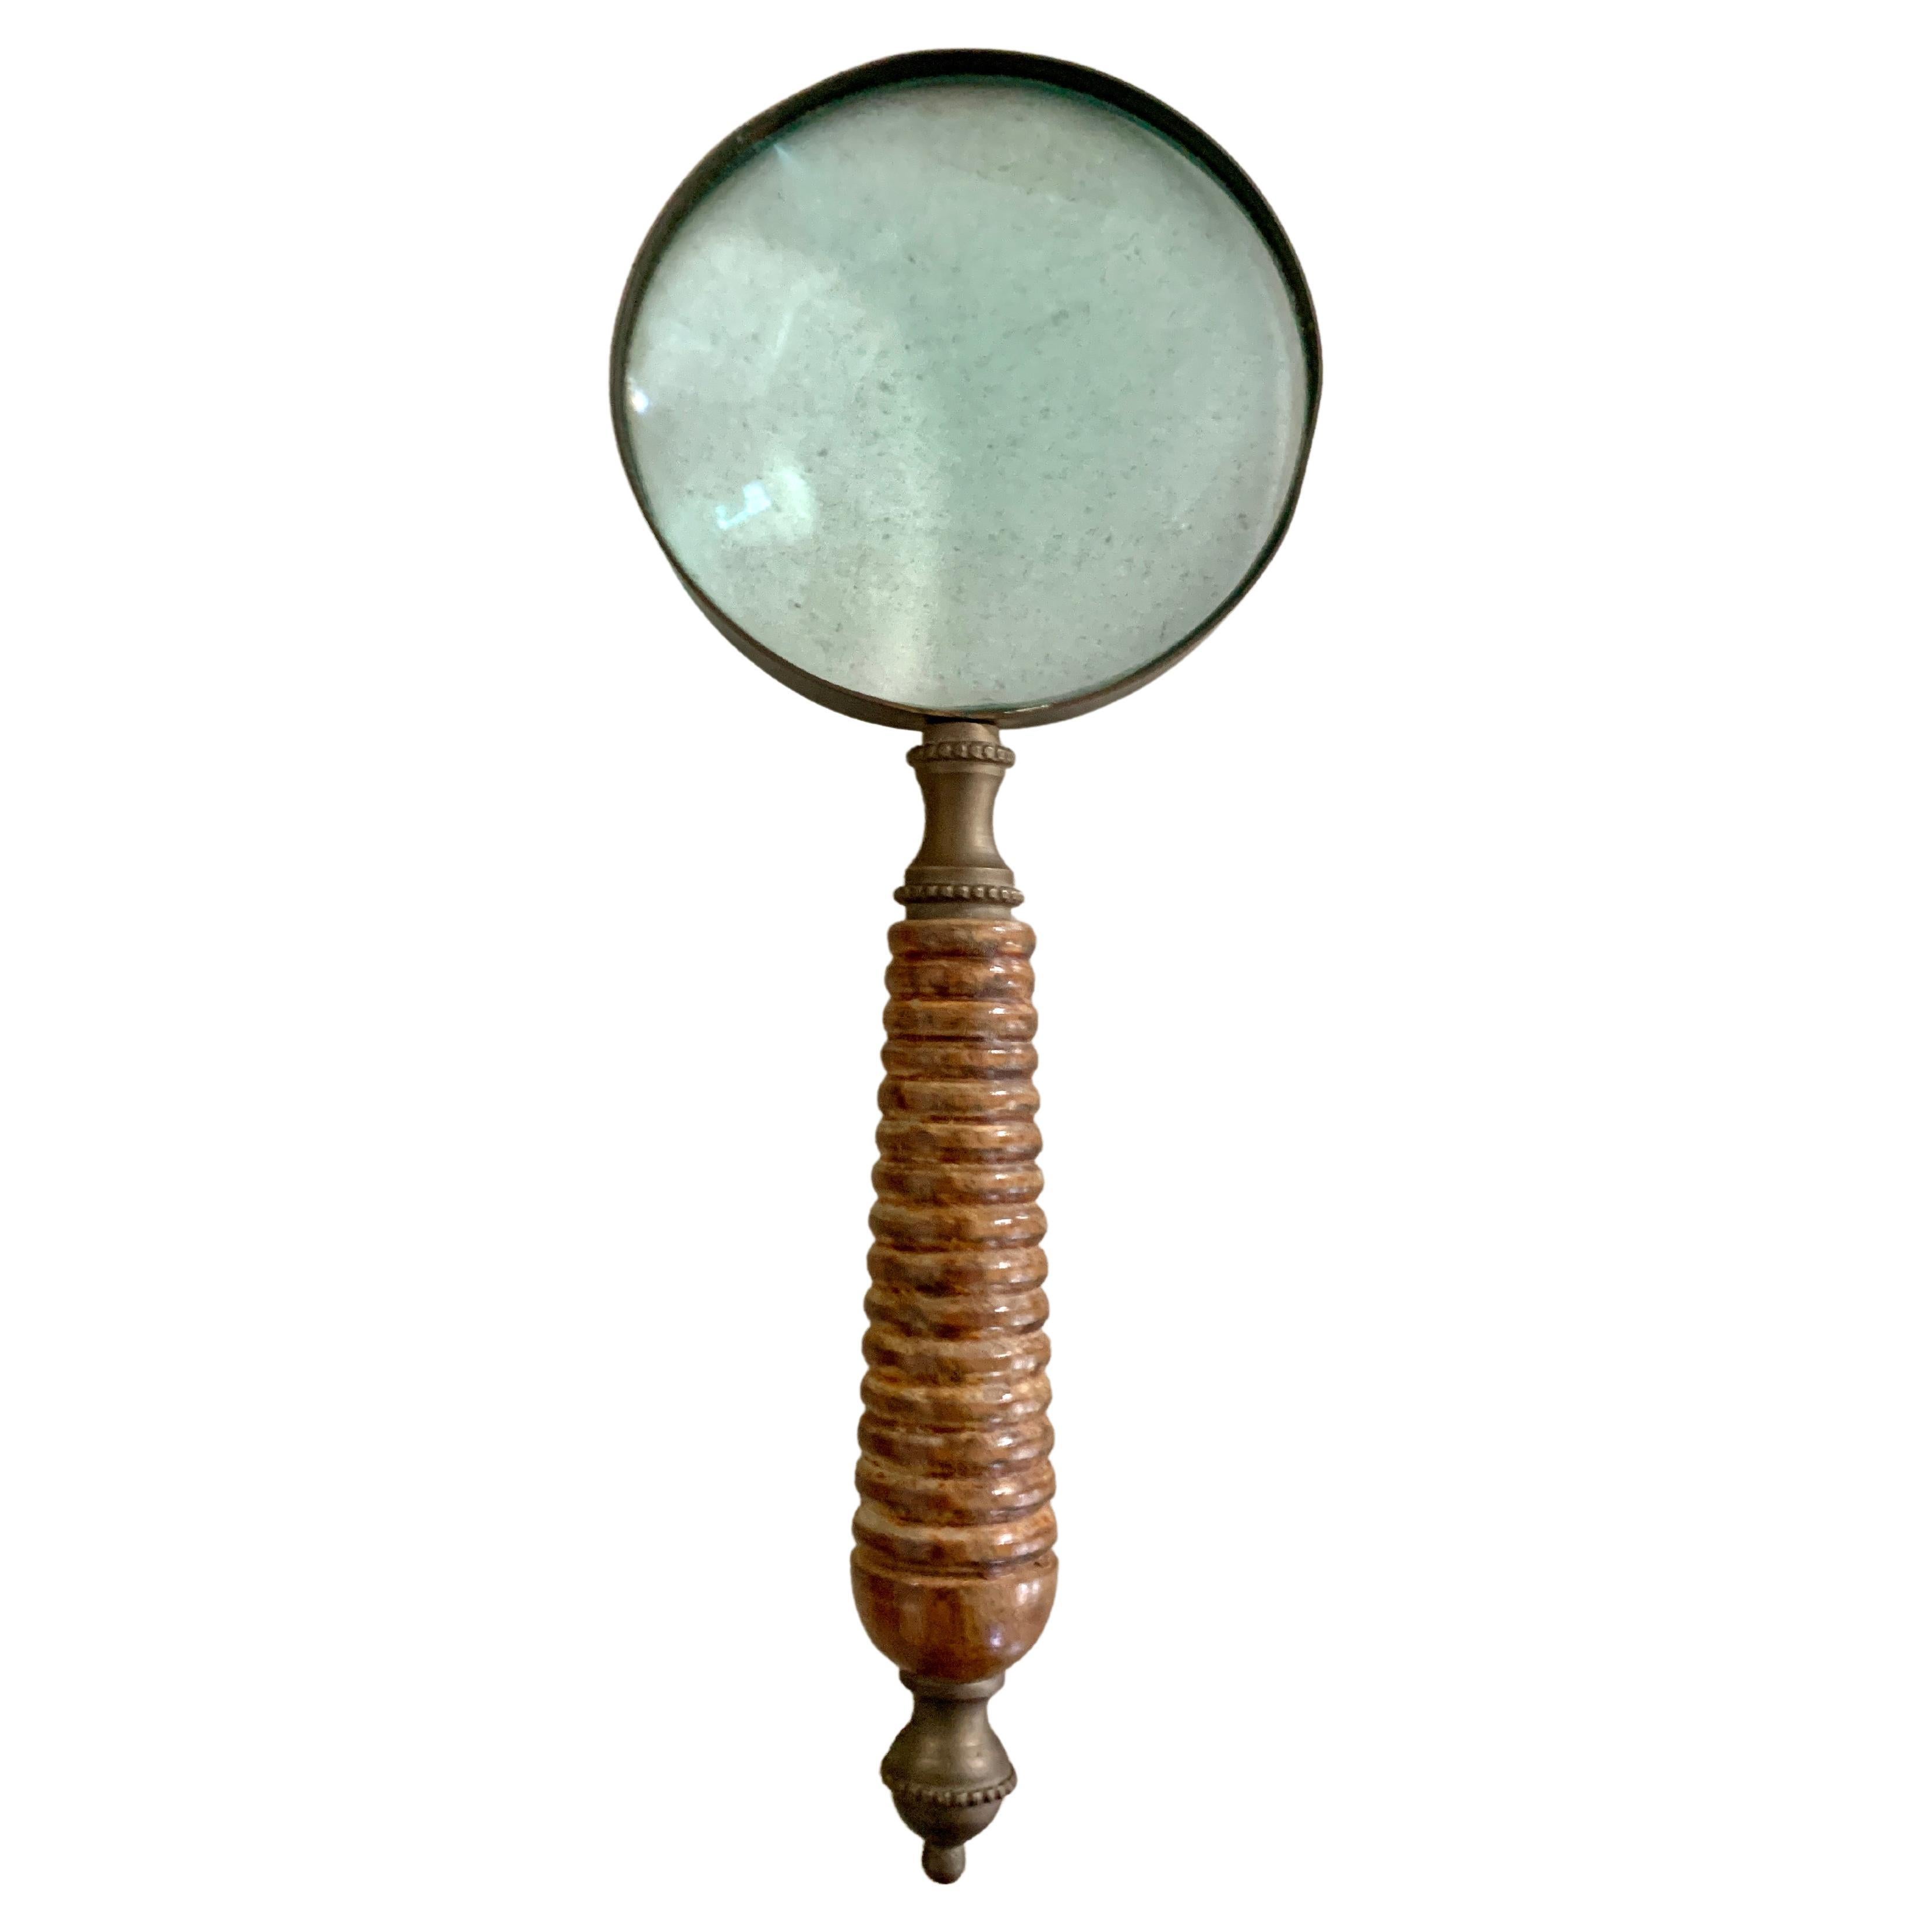 Magnifying glass with carved wooden handle and brass finial - a compliment to any desk or work station... the Ralph Lauren #cottagestyle Look. For those who need a bit of assistance reading a recipe, back of a box, or just want to add a look of